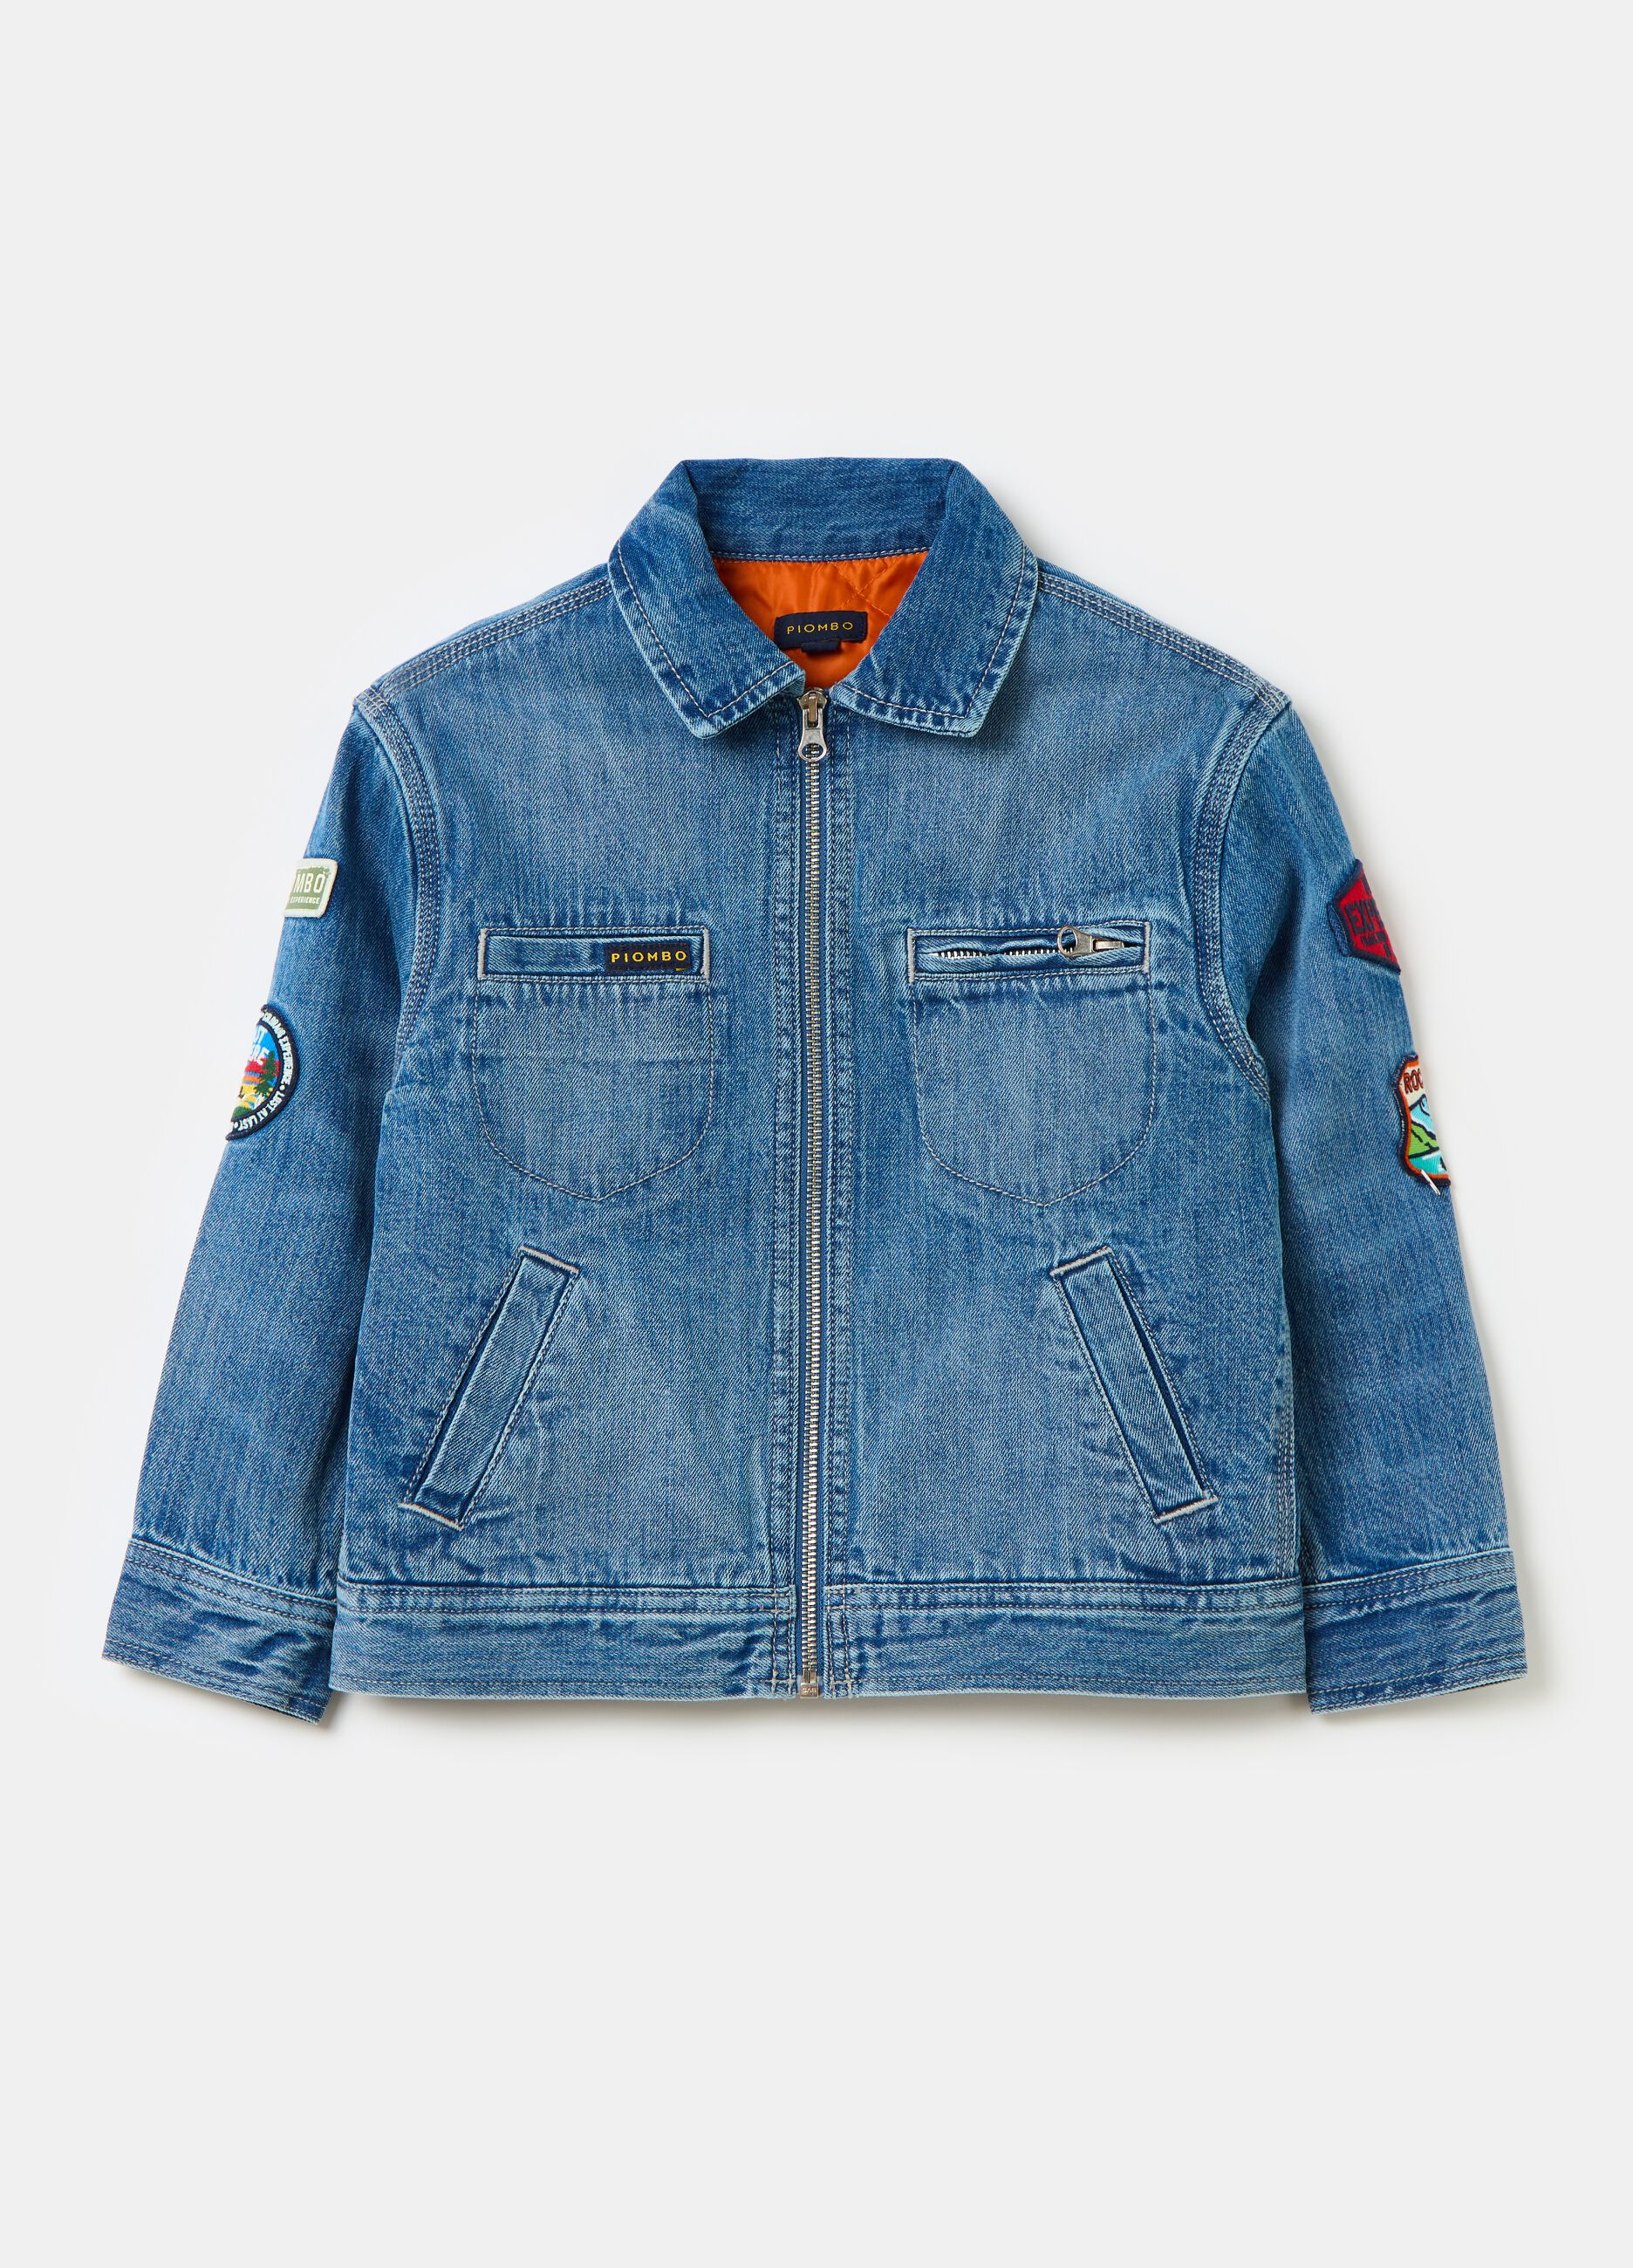 Full-zip jacket in denim with patch